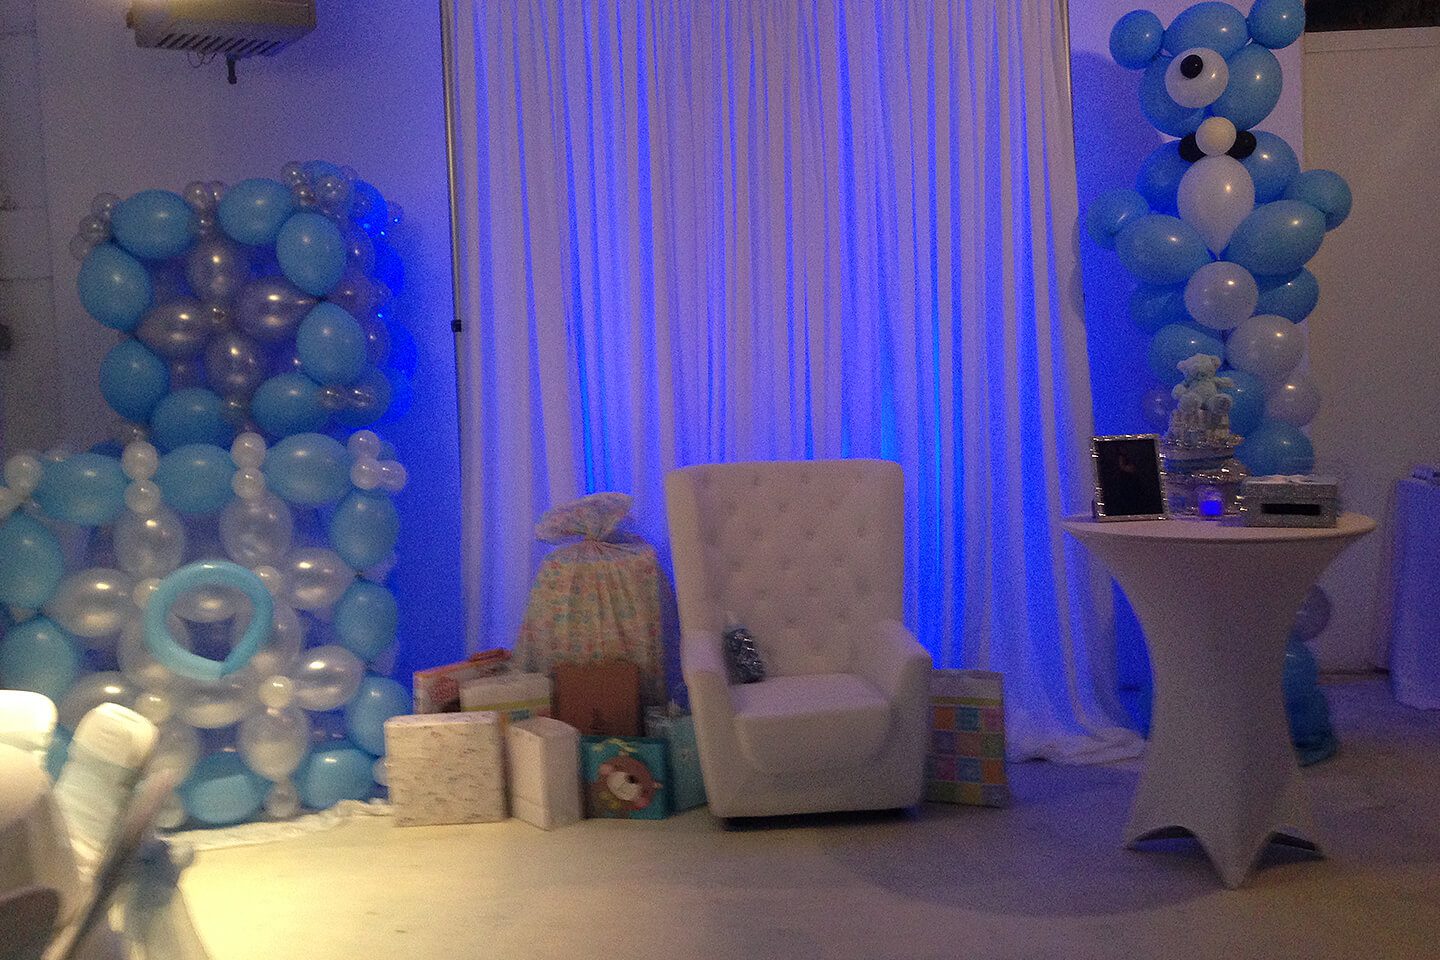 A white chair and some blue balloons